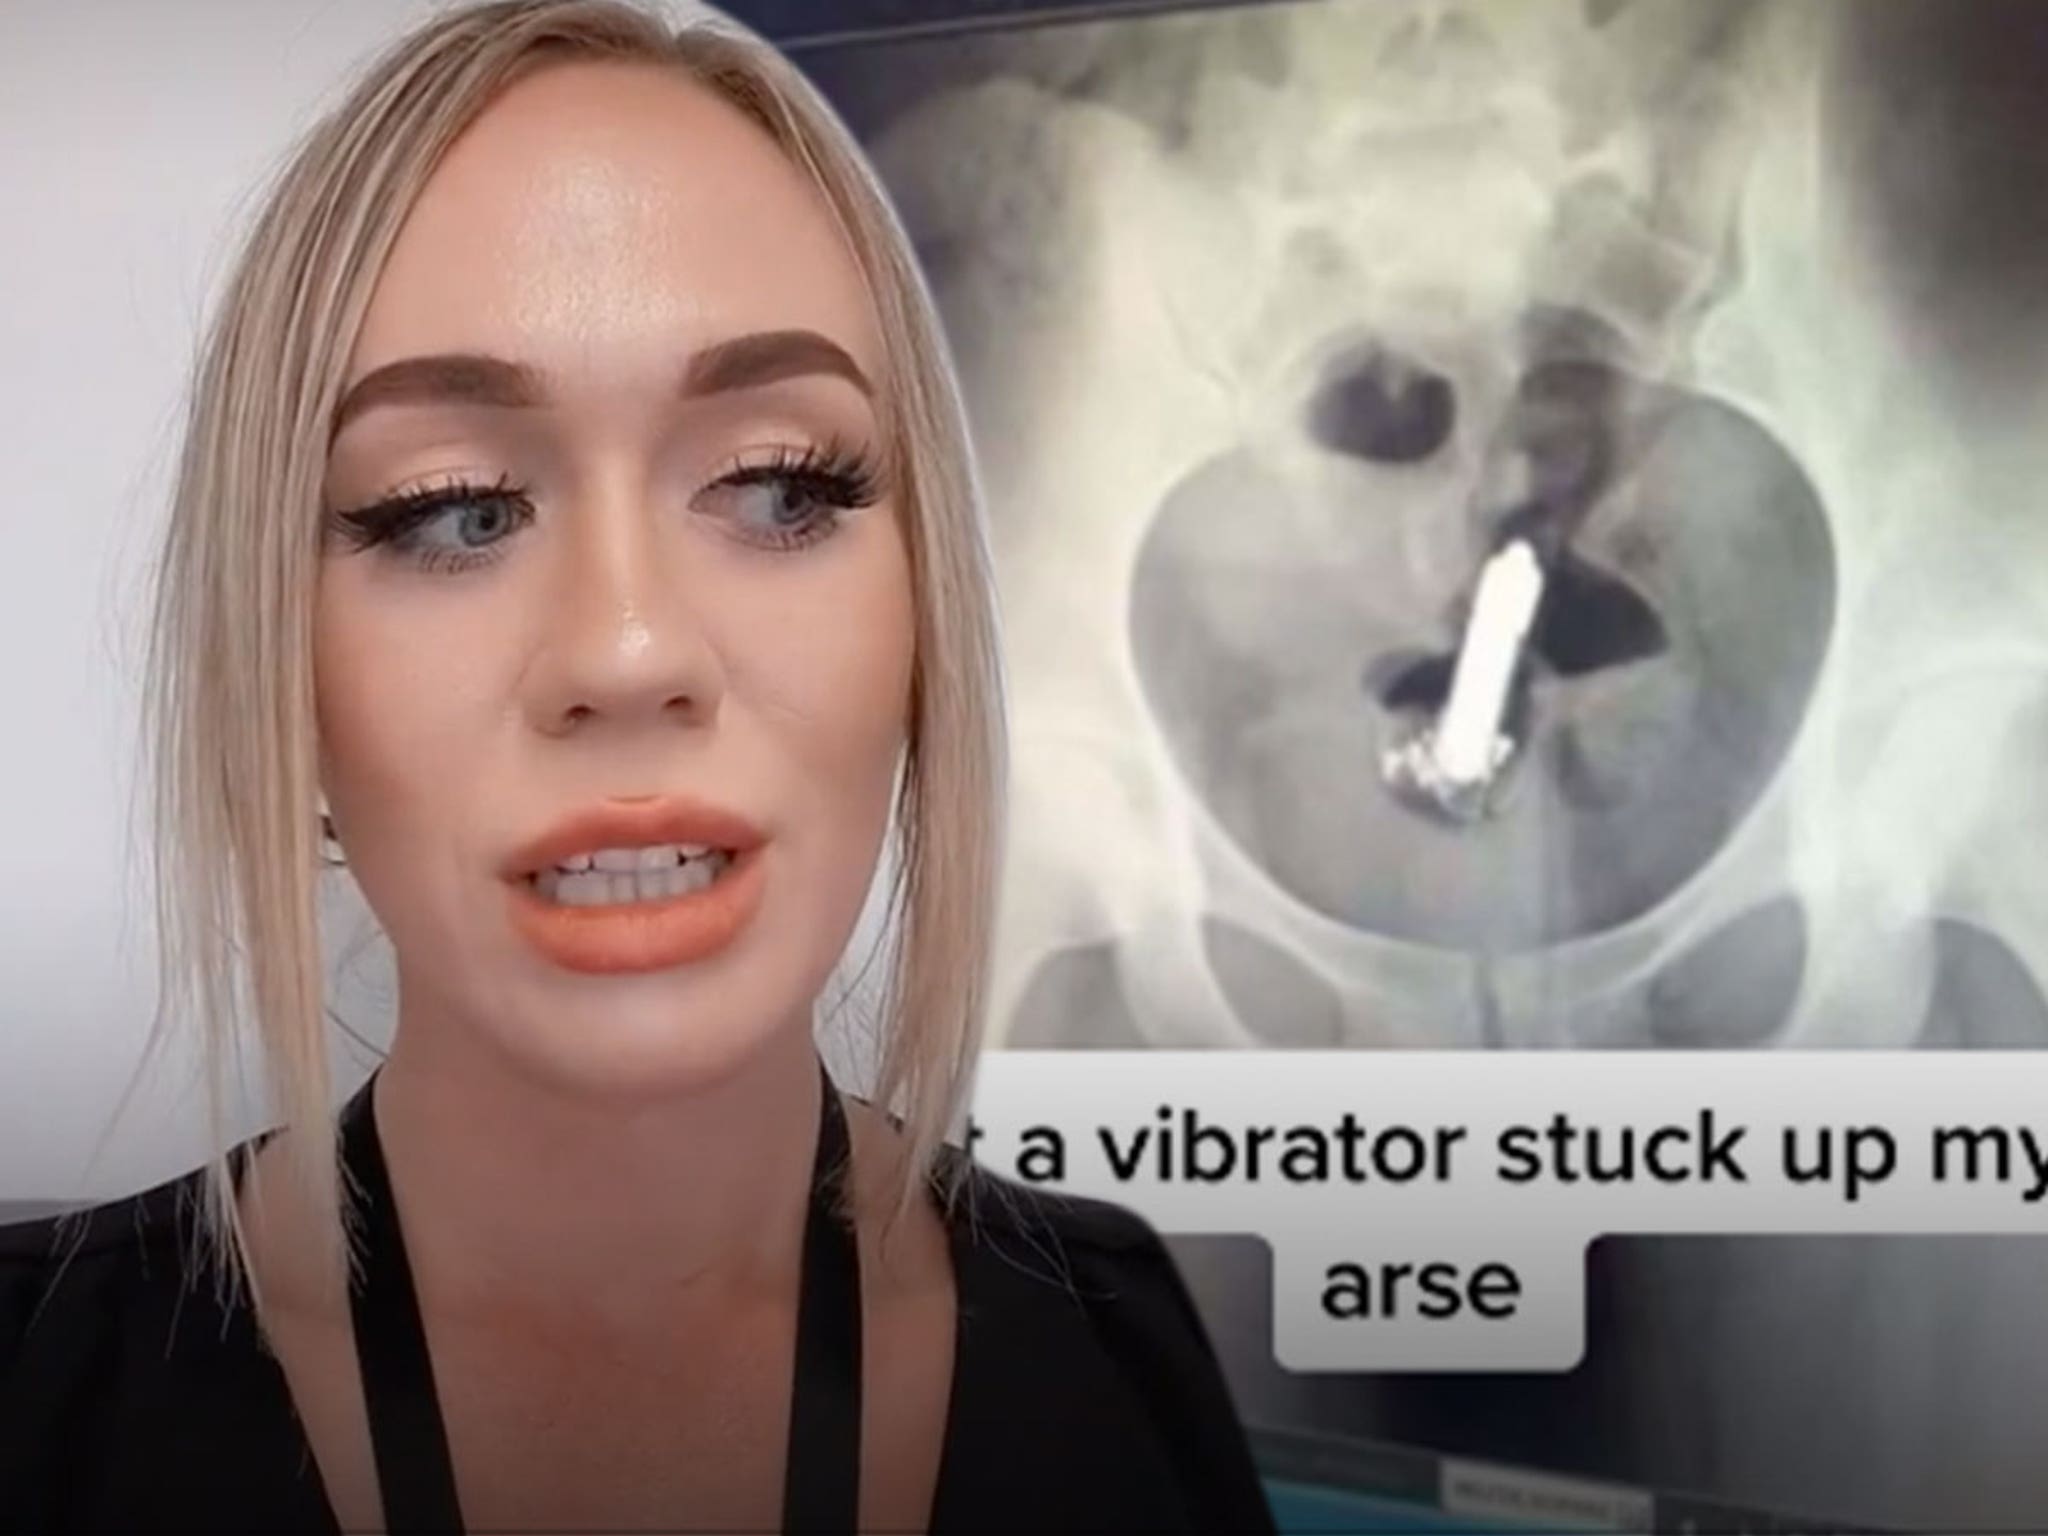 TikTok Star Says She Needed Surgery After Losing Vibrator in Butt photo